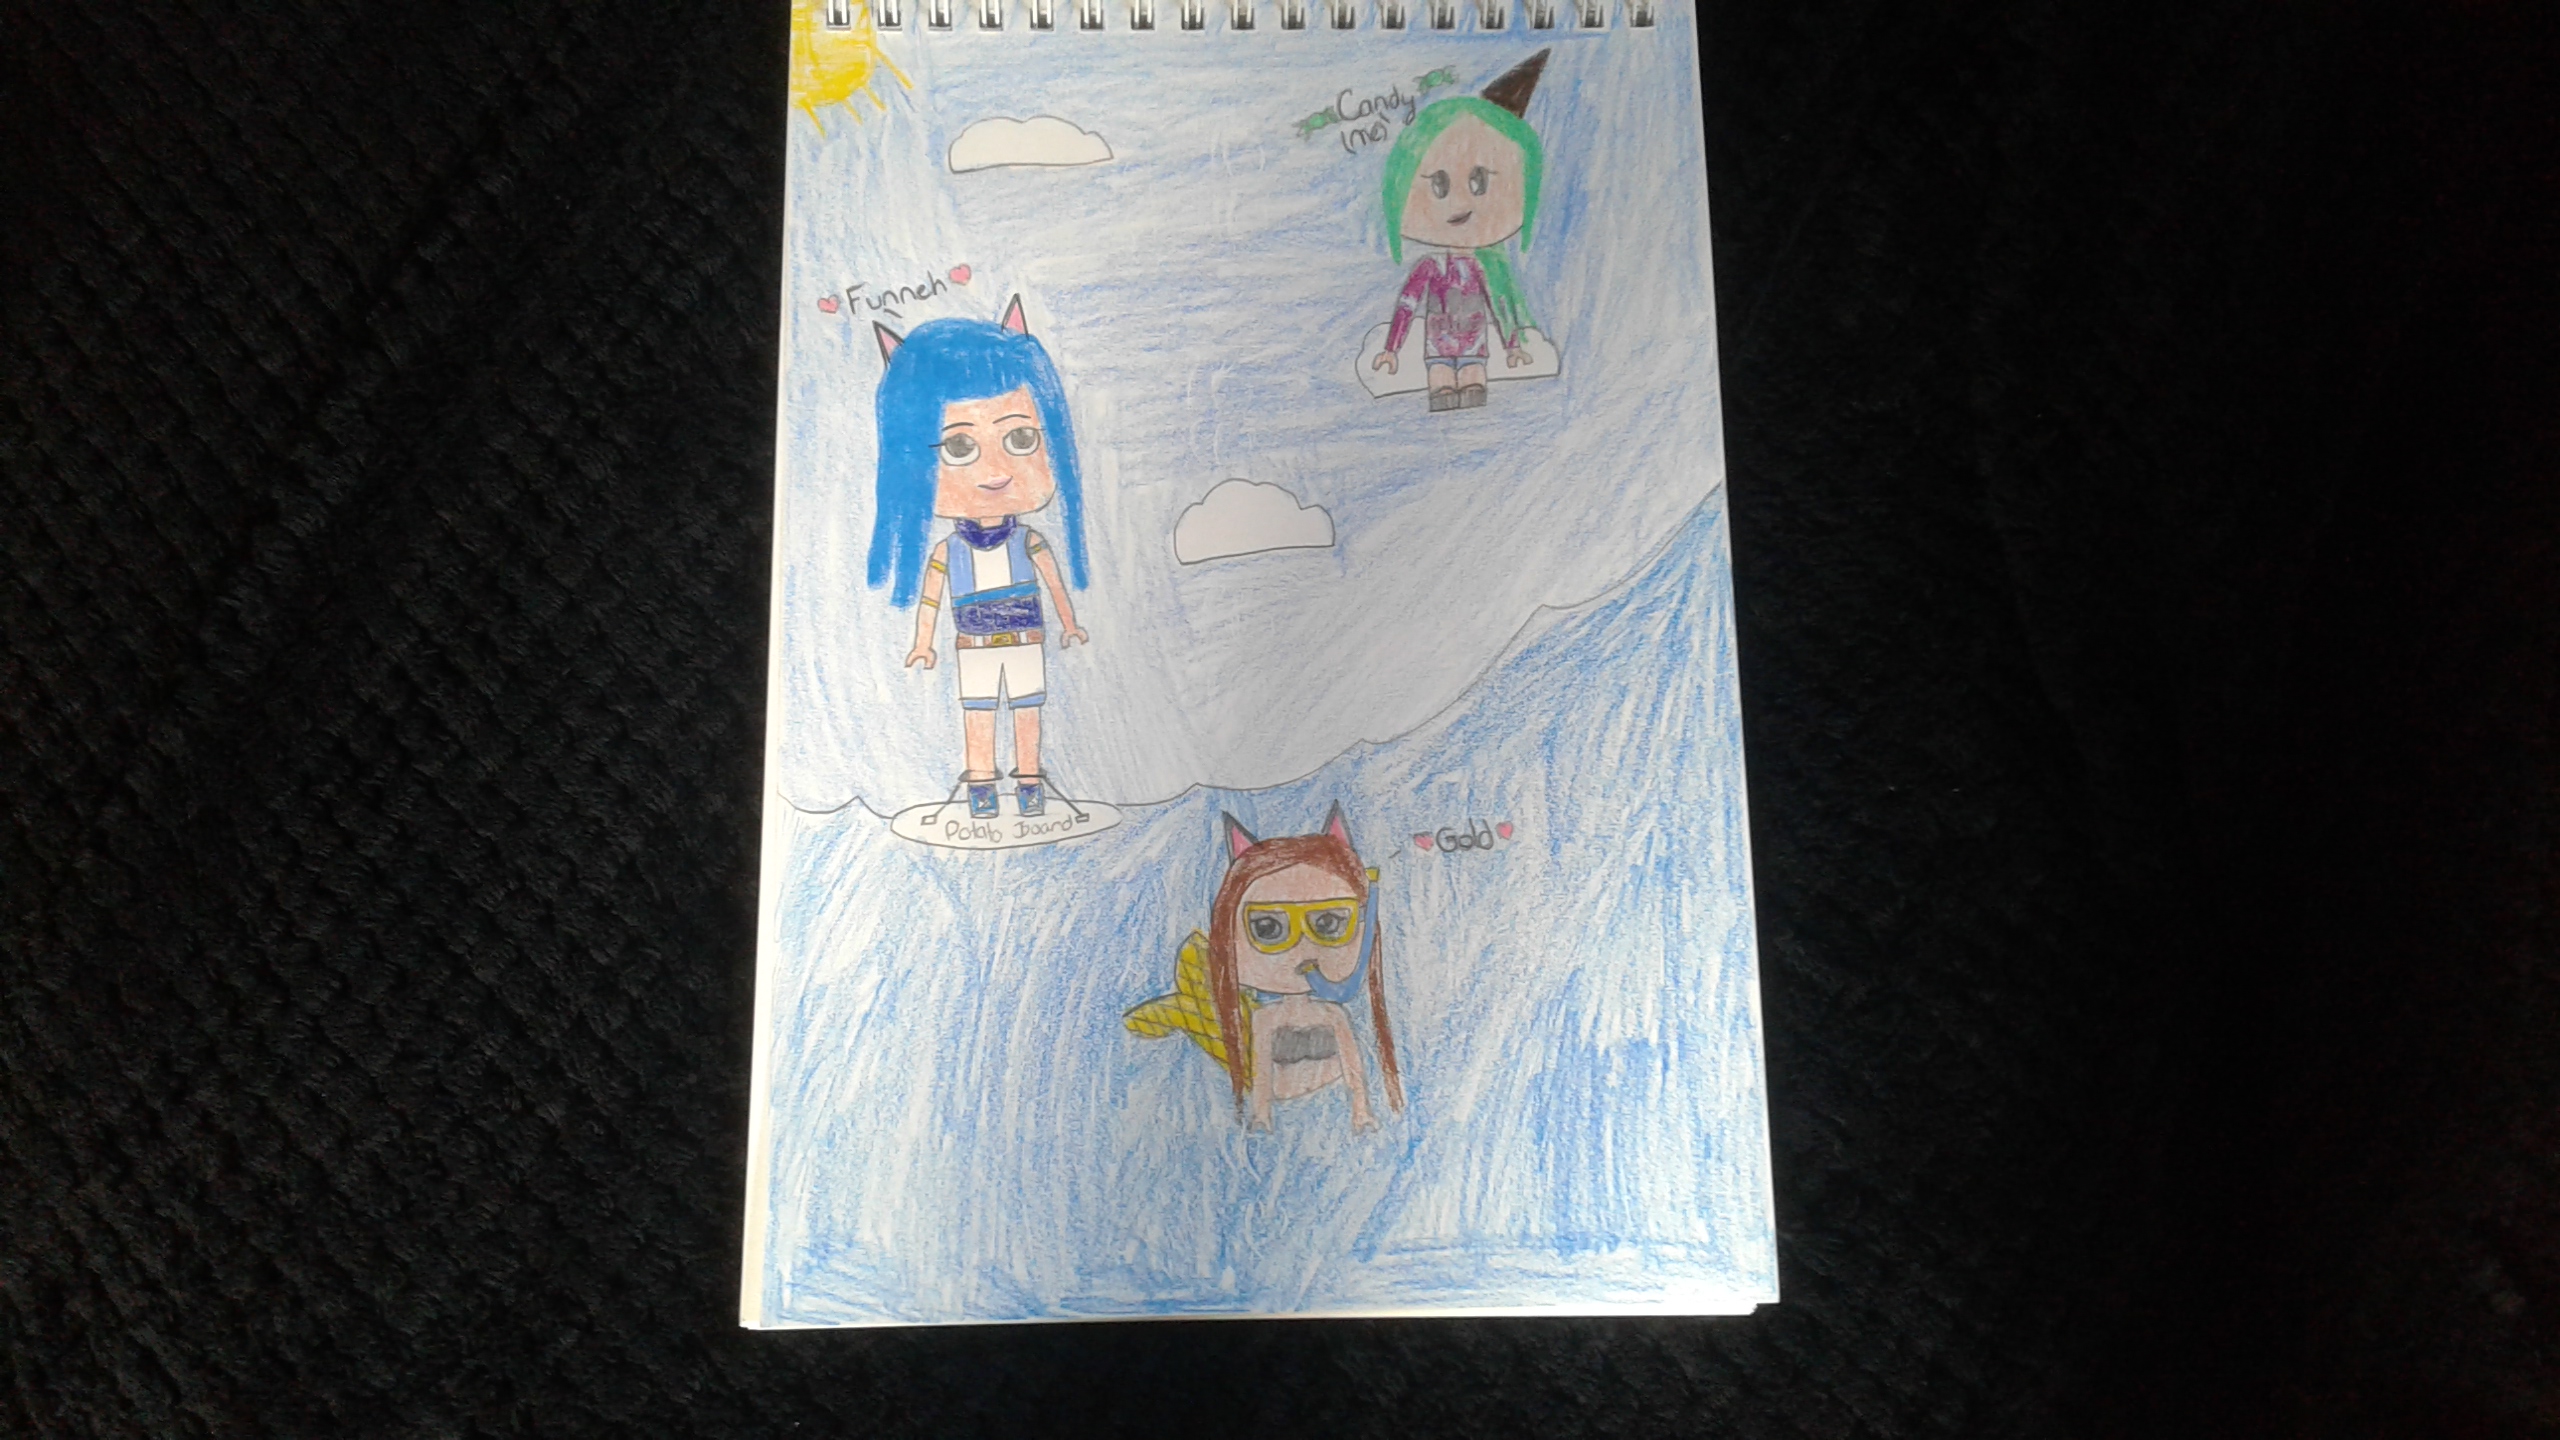 Itsfunneh Goldenglare And Candy Me In Roblox By Electricsoda5 On Deviantart - itsfunneh roblox character